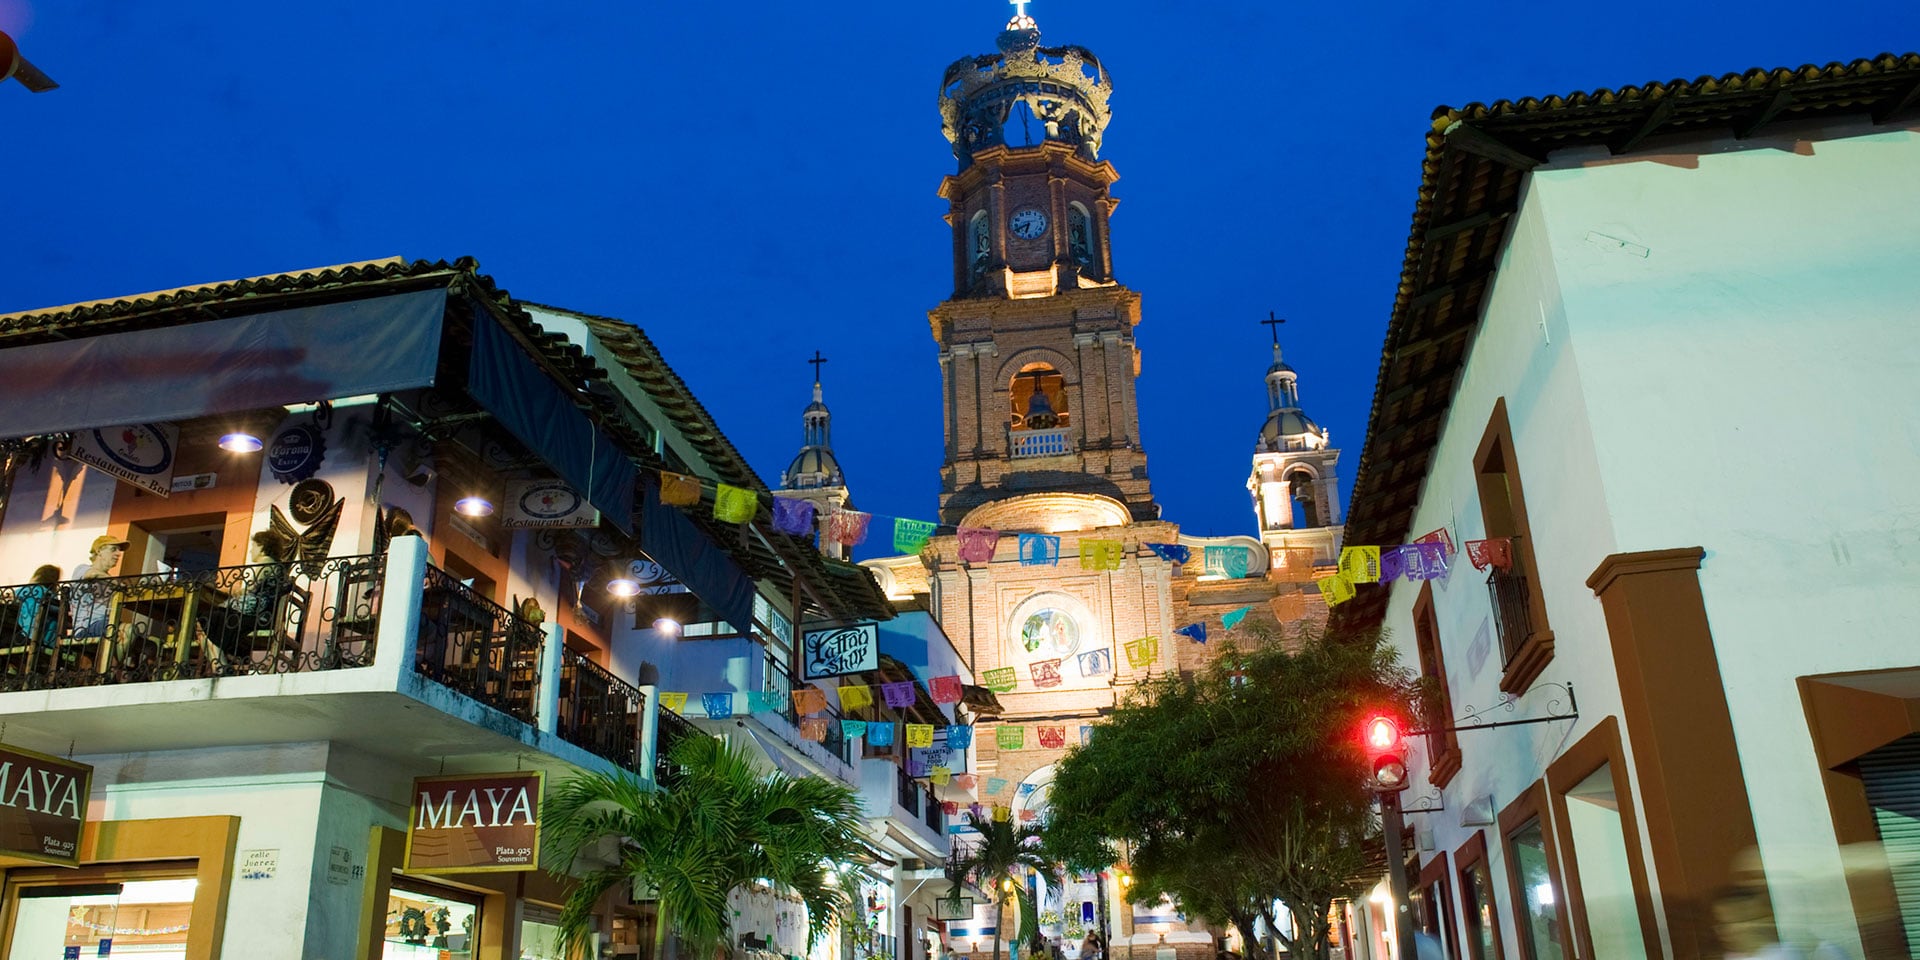 The Best of Both Vallartas: How to Enjoy a “Night on the Towns” in Puerto and Nuevo Vallarta